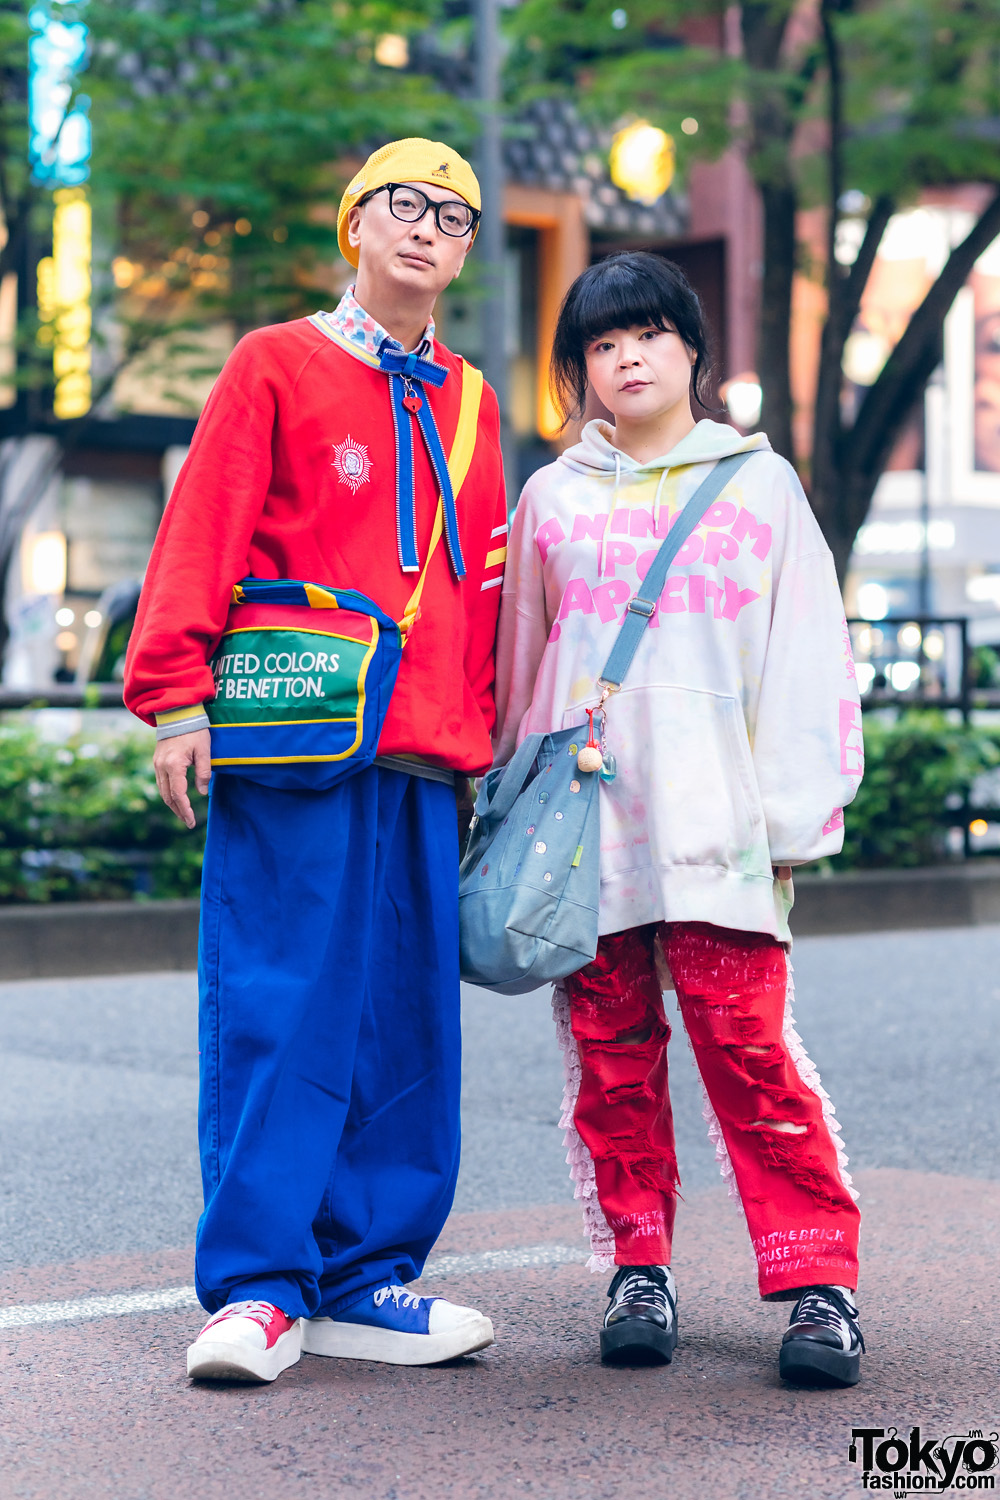 Japanese Couple's Colorful Street Styles w/ Kangol Hat, Nincompoop Capacity, Cross Colours, Tokyo Bopper Mismatched Sneakers, United Colors of Benetton Bag, Ripped Pants & Denim Tote